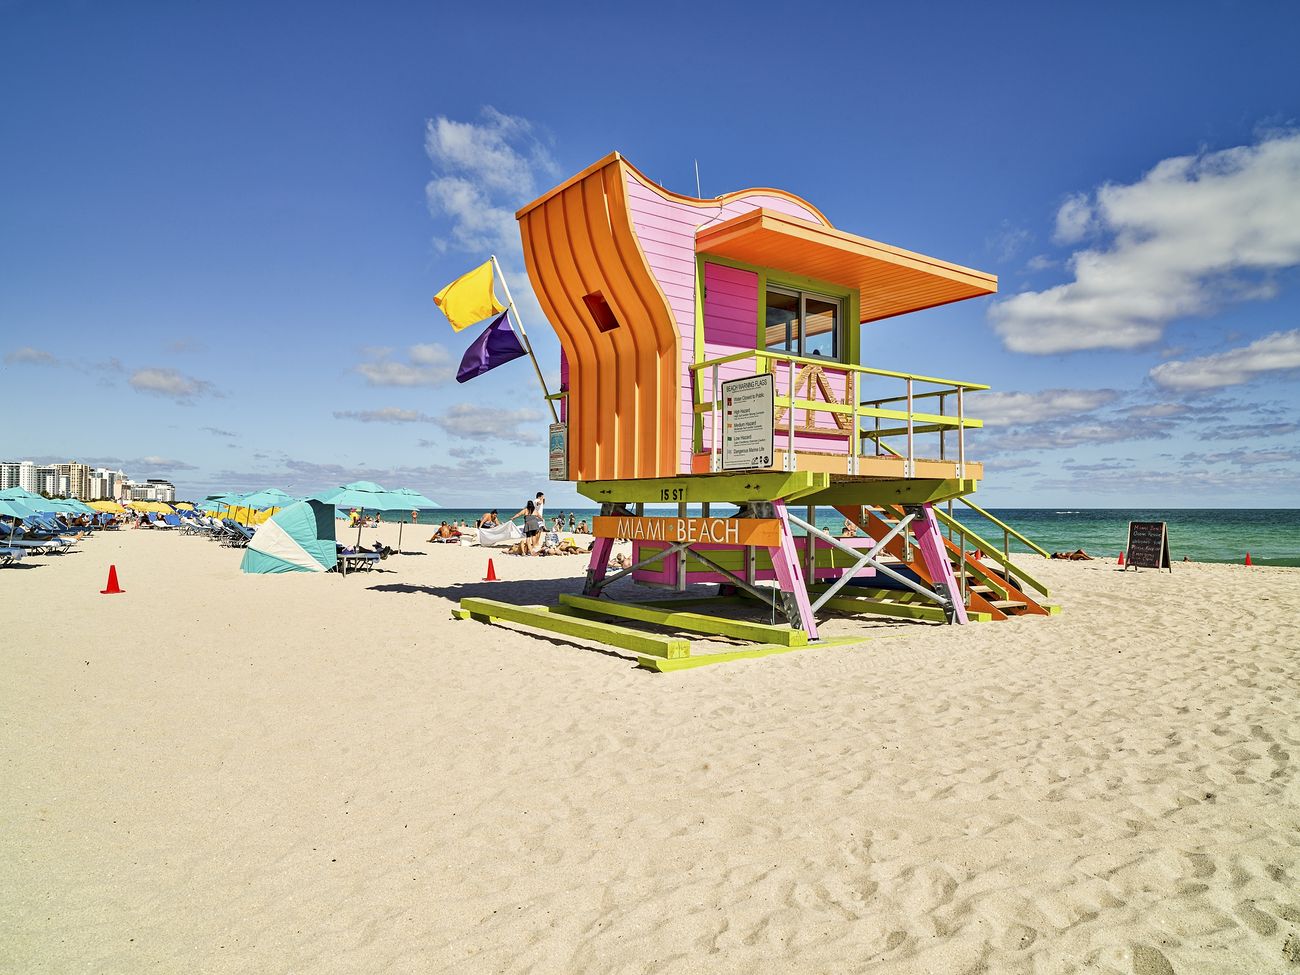 South Beach lifeguard stands at Miami